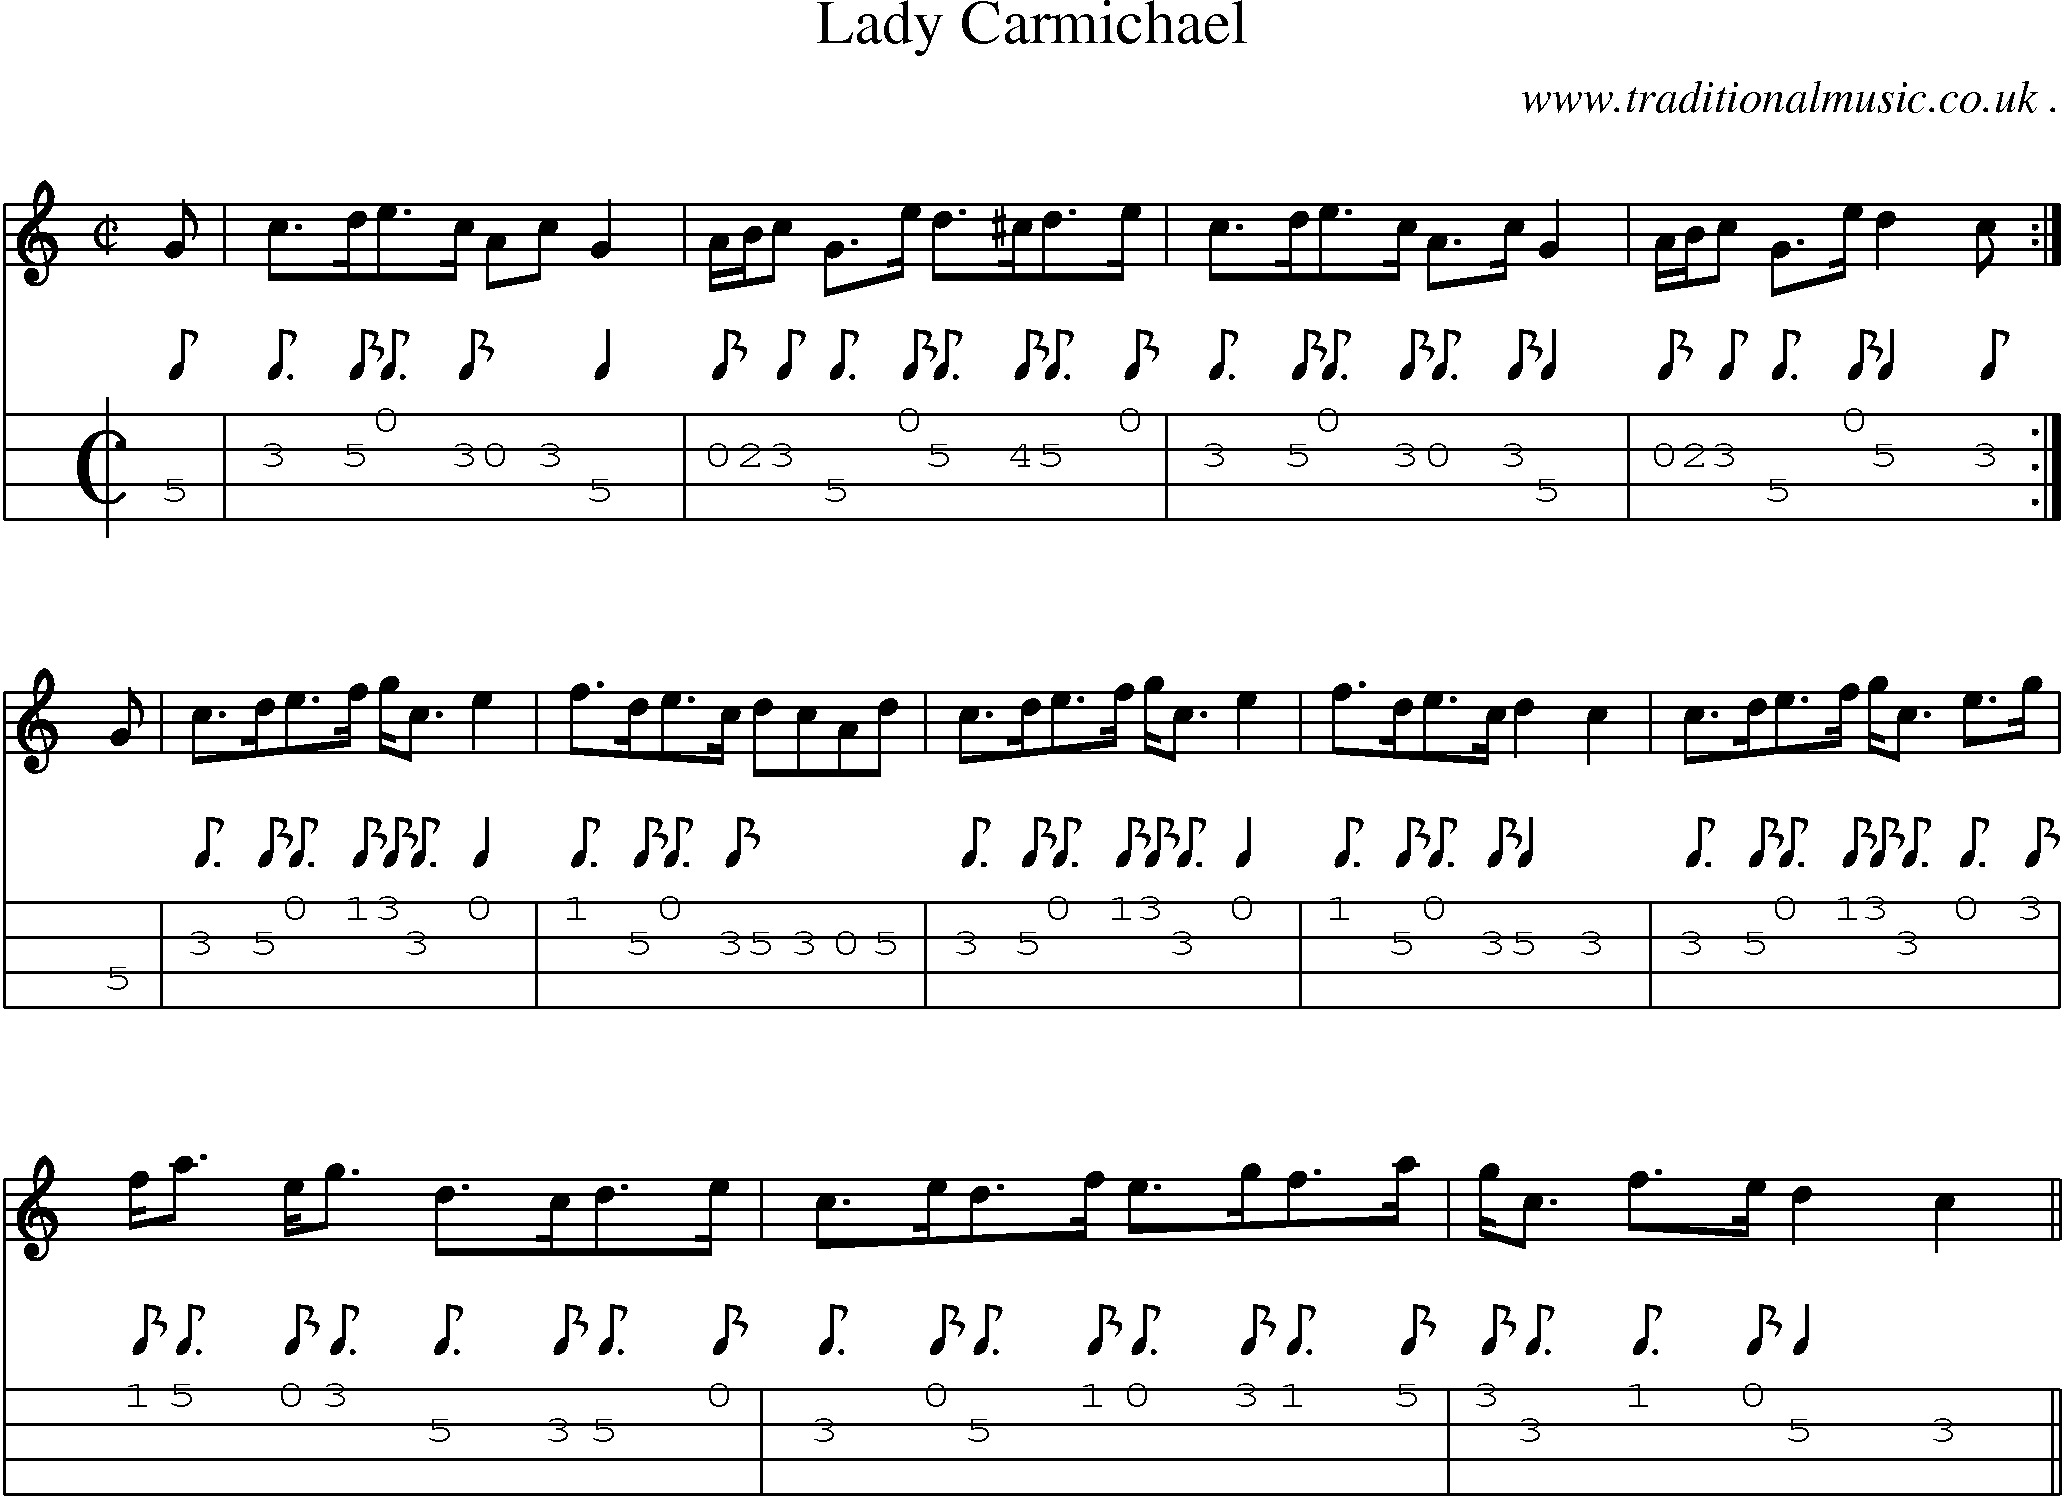 Sheet-music  score, Chords and Mandolin Tabs for Lady Carmichael